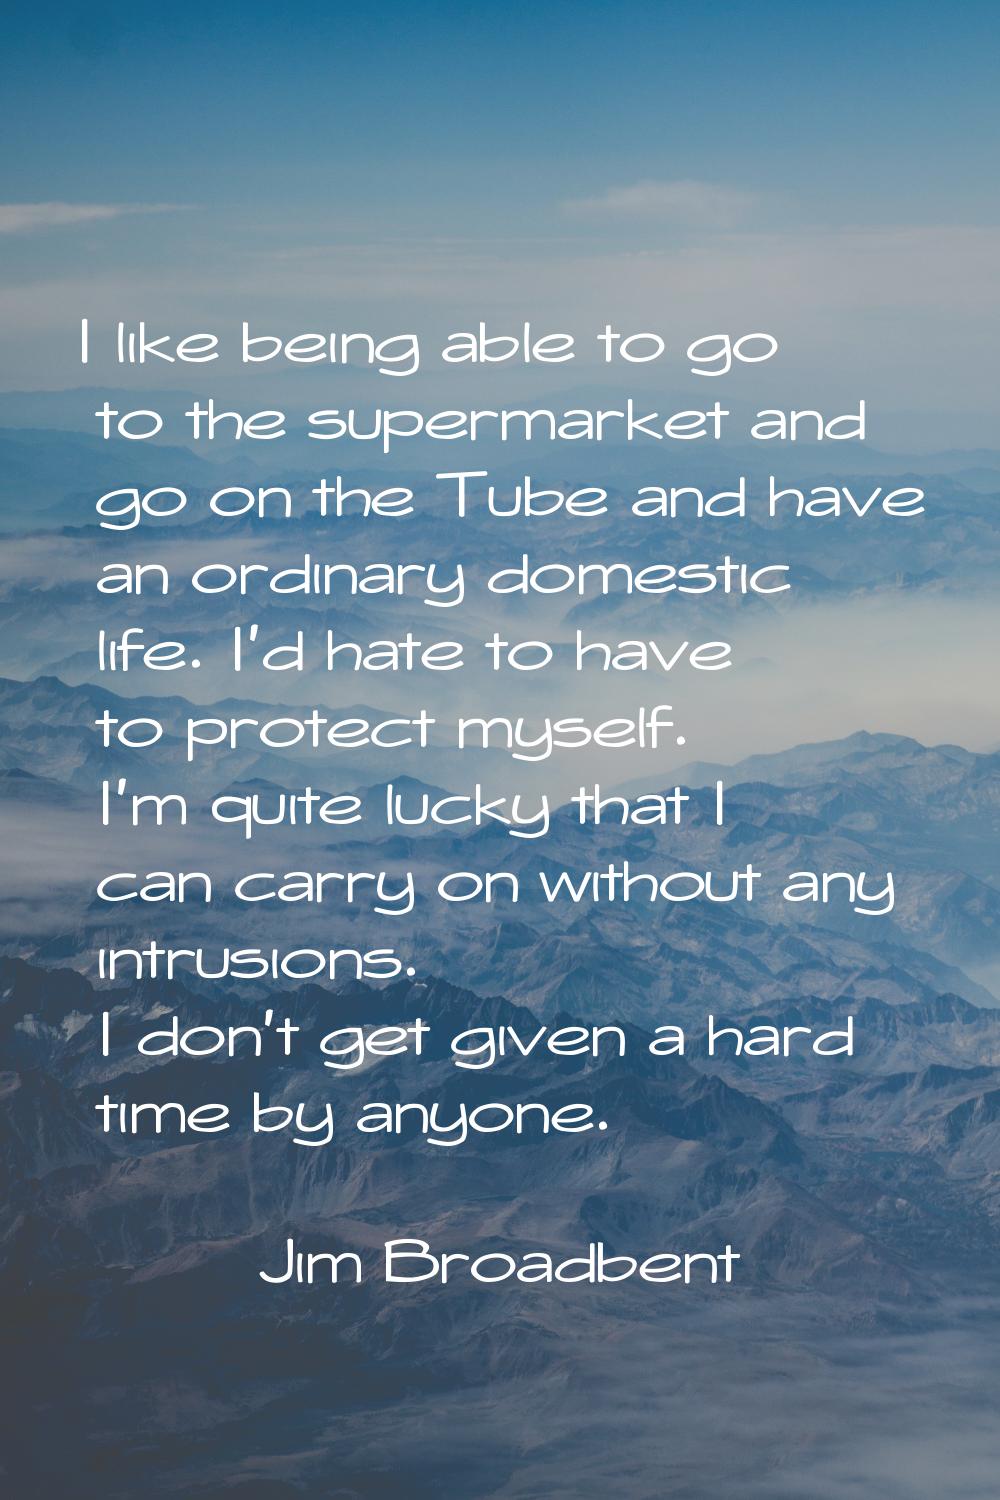 I like being able to go to the supermarket and go on the Tube and have an ordinary domestic life. I